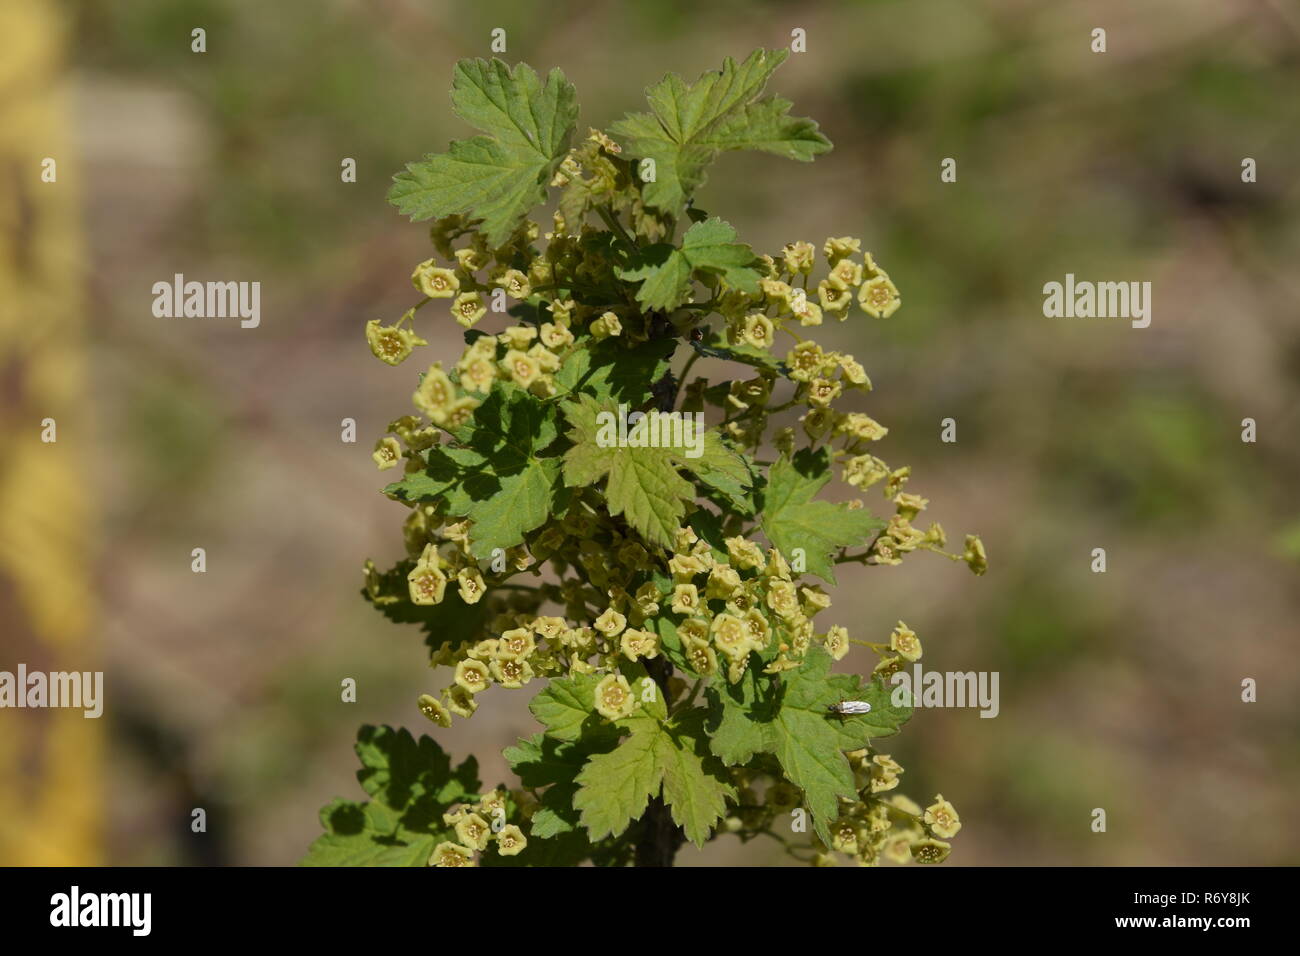 Flowers of red currant in spring on a stalk. Stock Photo